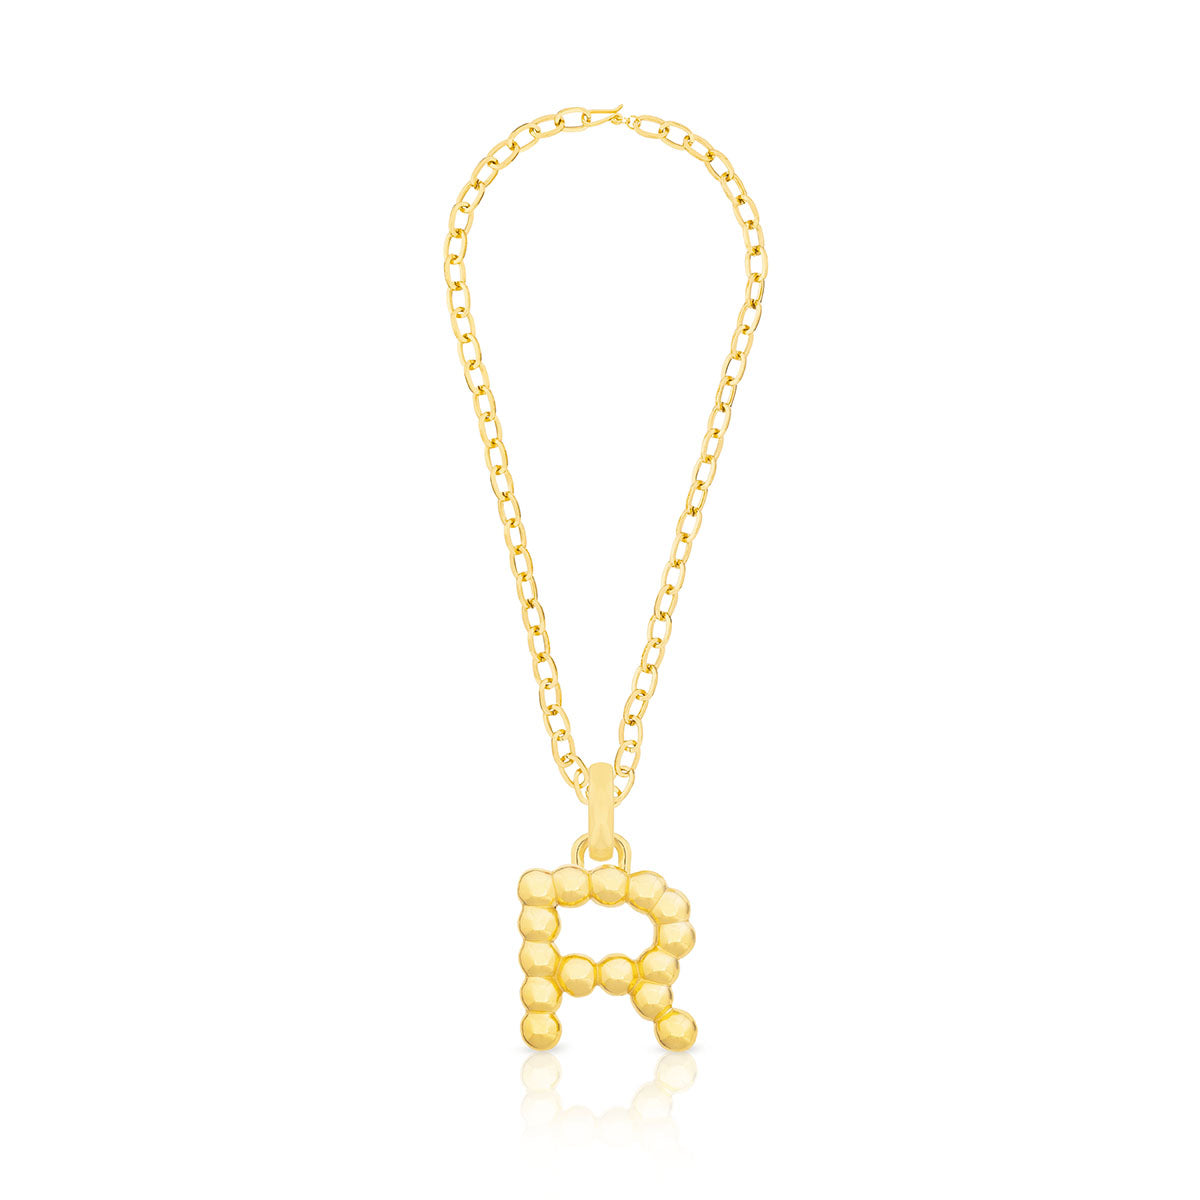 BOLD LETTER NECKLACE